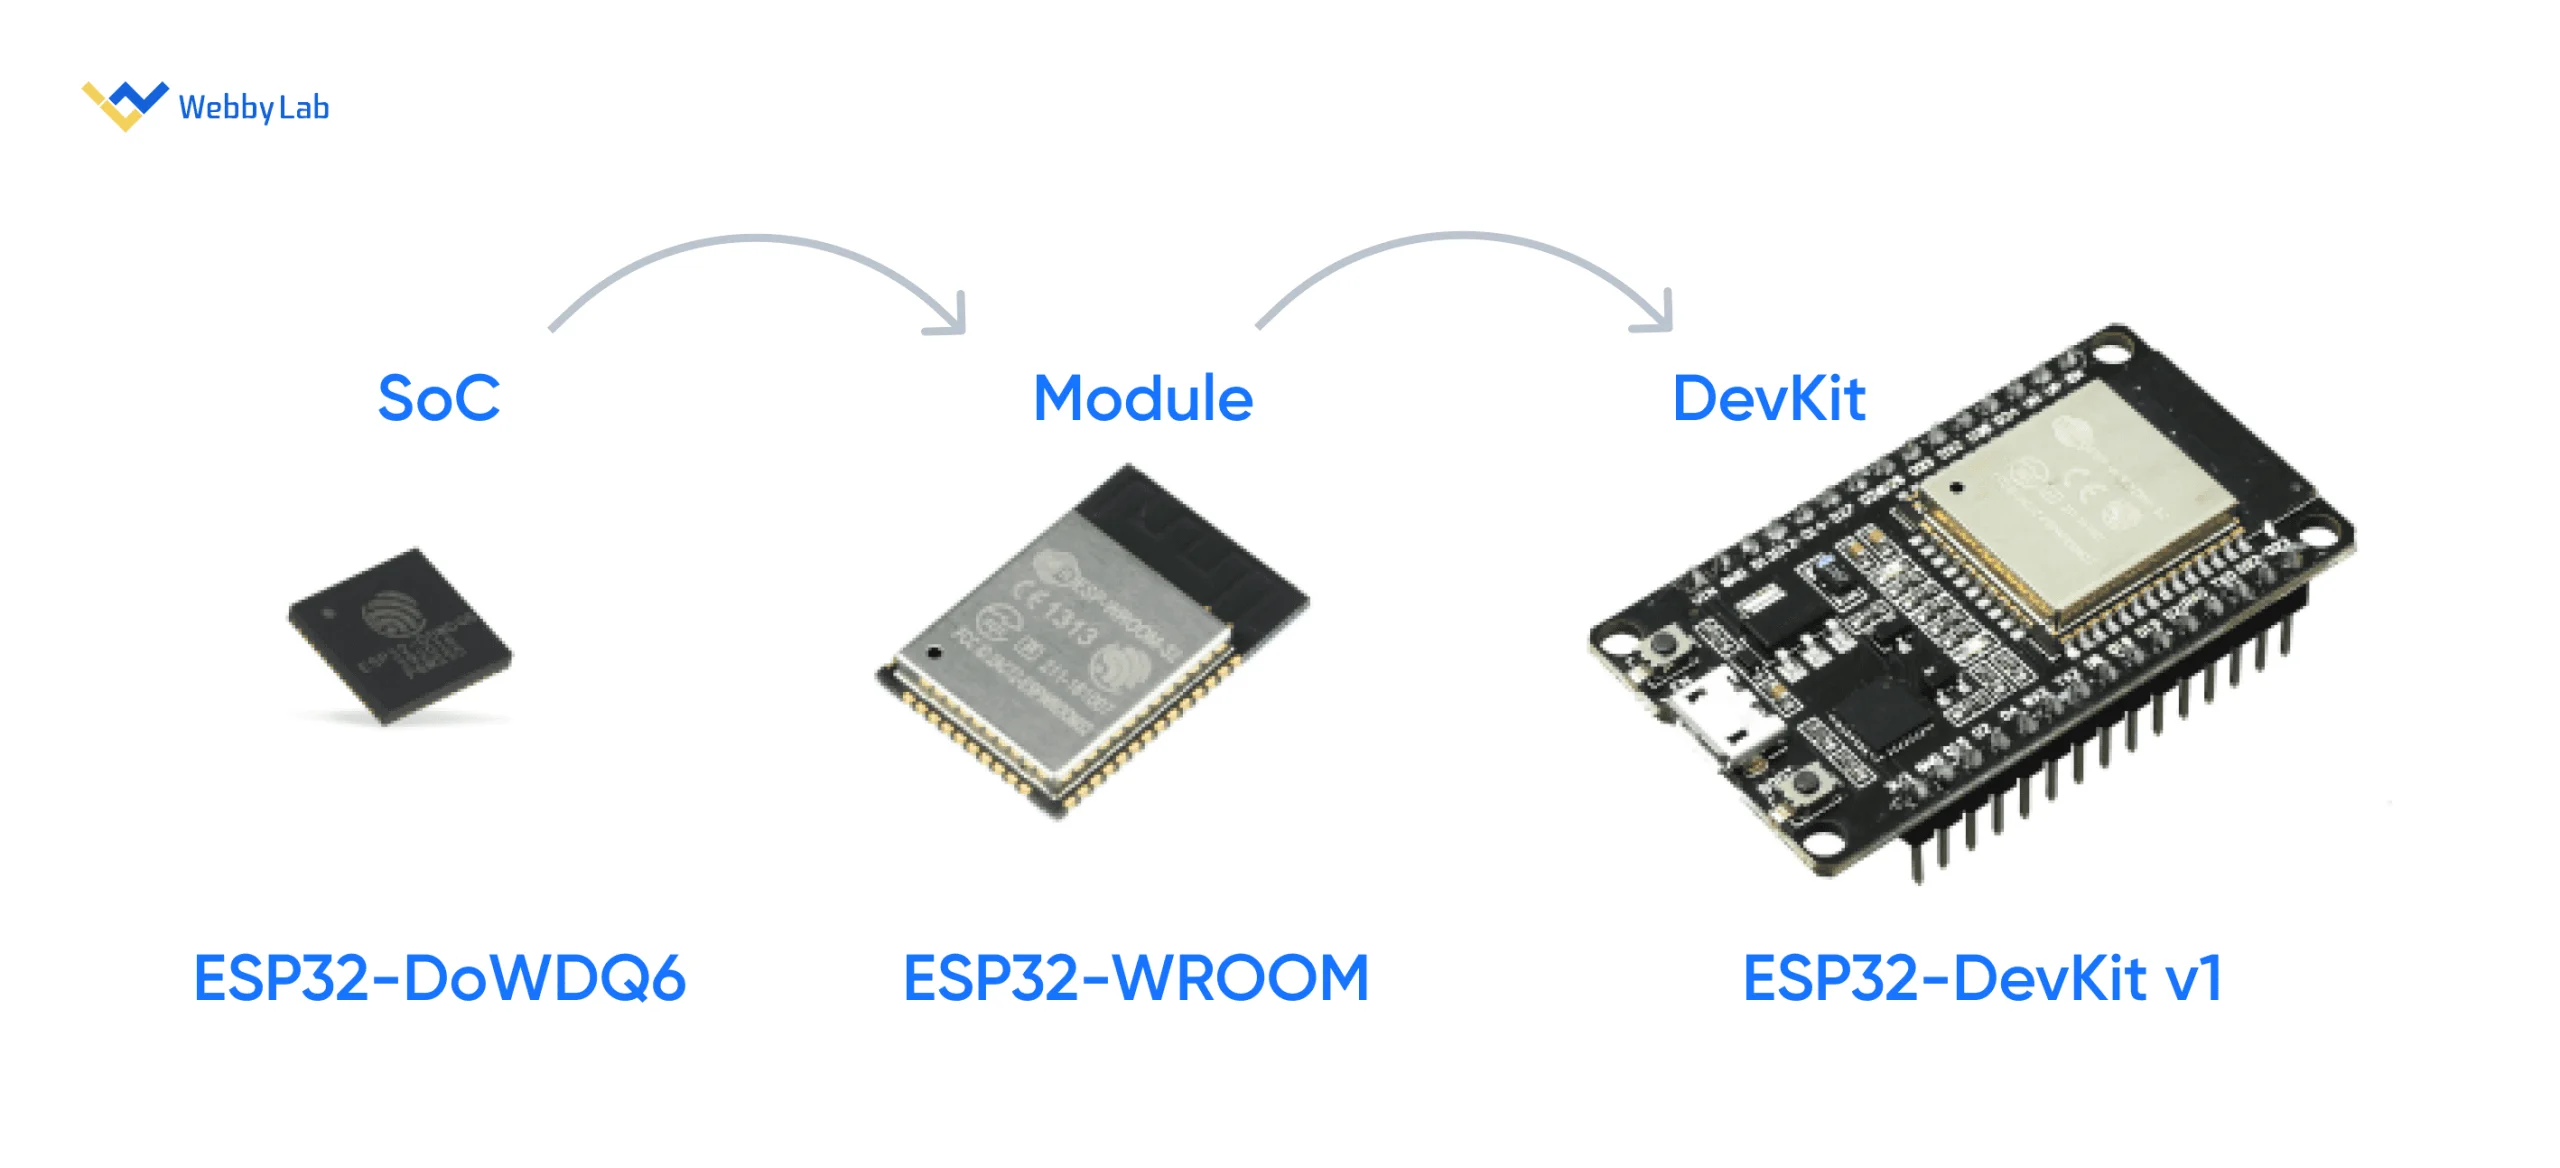 The comparison of ESP32 chips, modules, and development boards. 